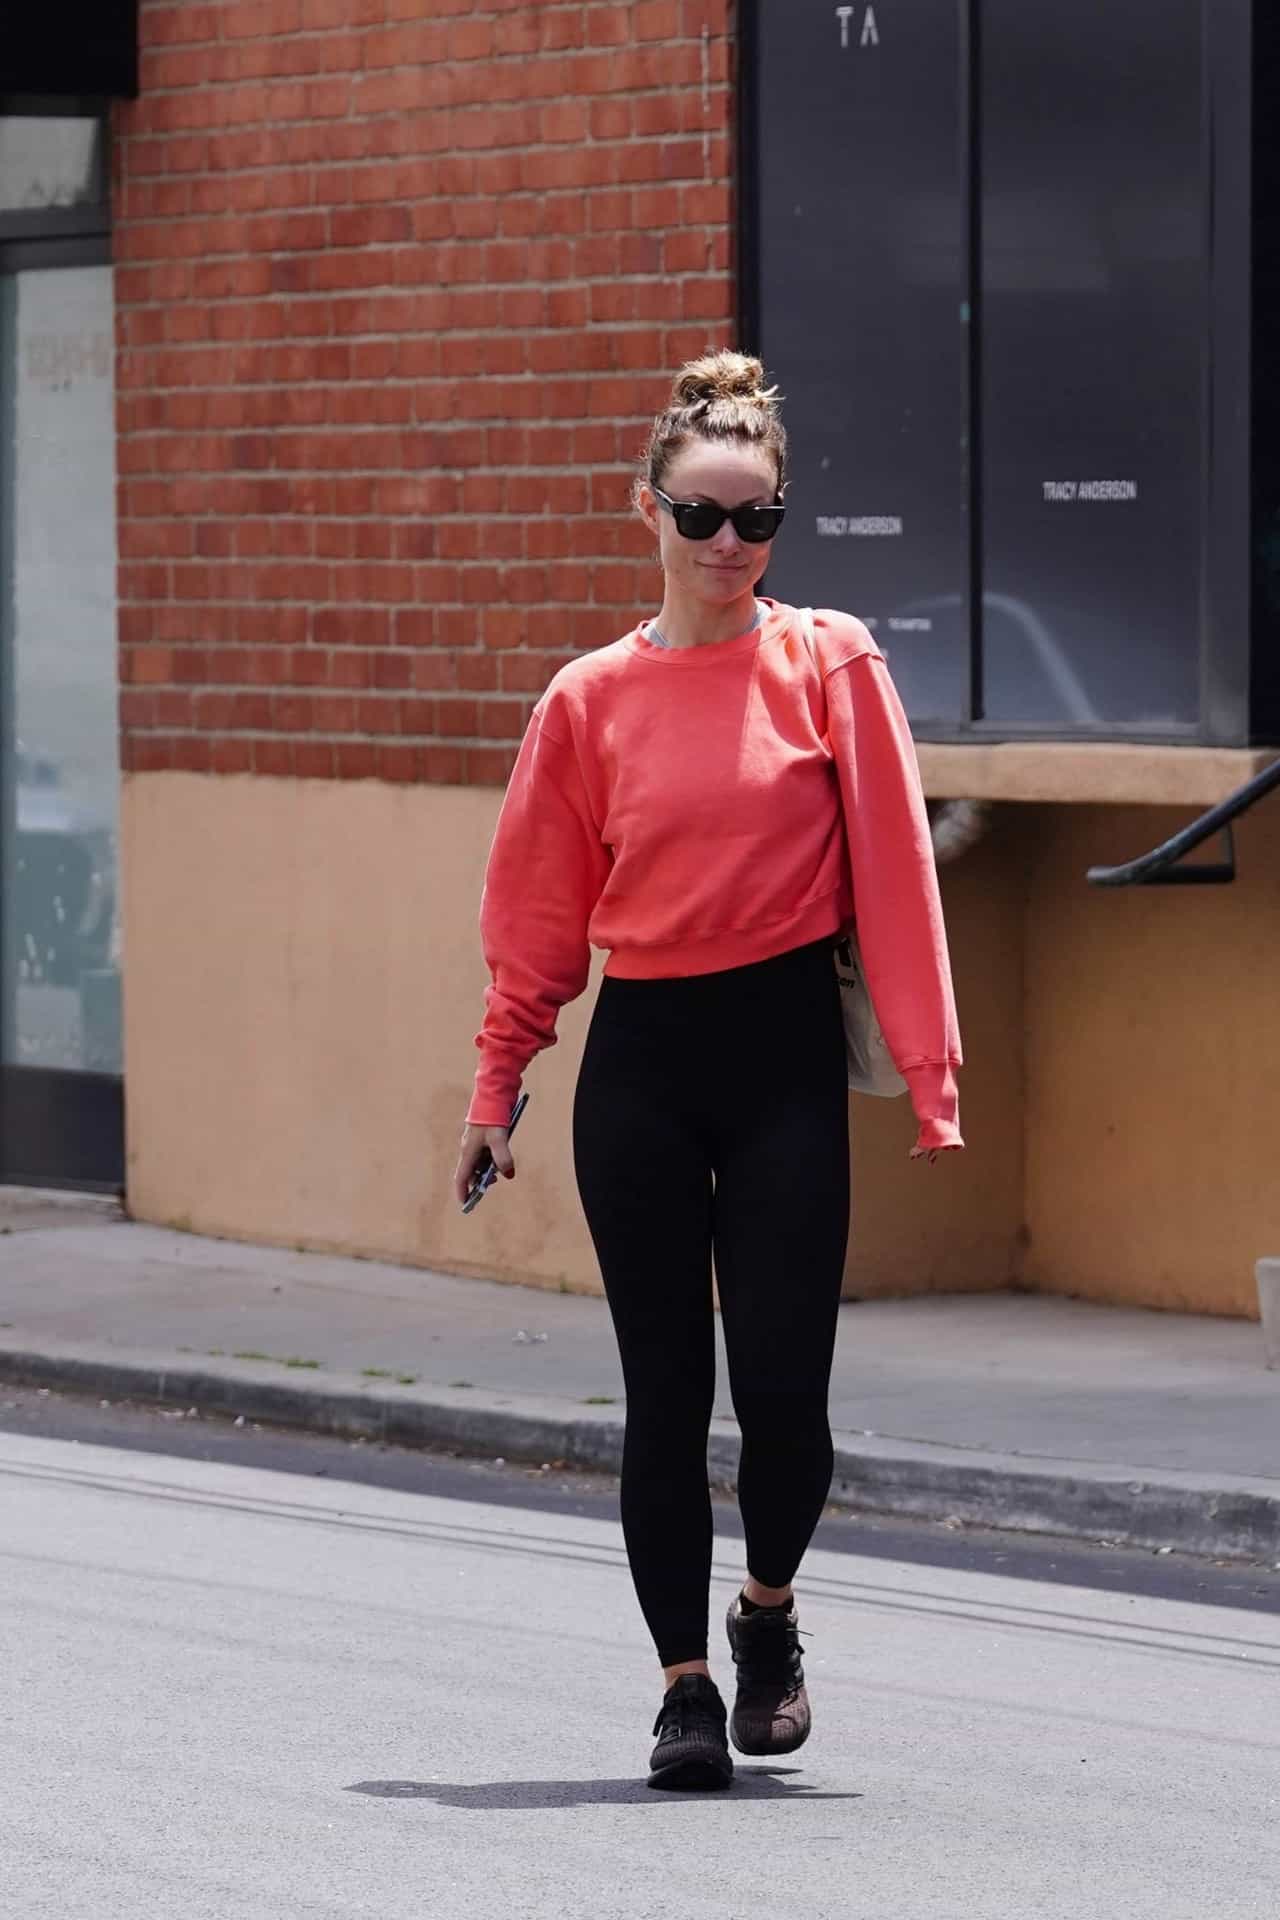 Olivia Wilde Leaves the Gym in Hot Pink Crew-Neck Sweater and Black Leggins